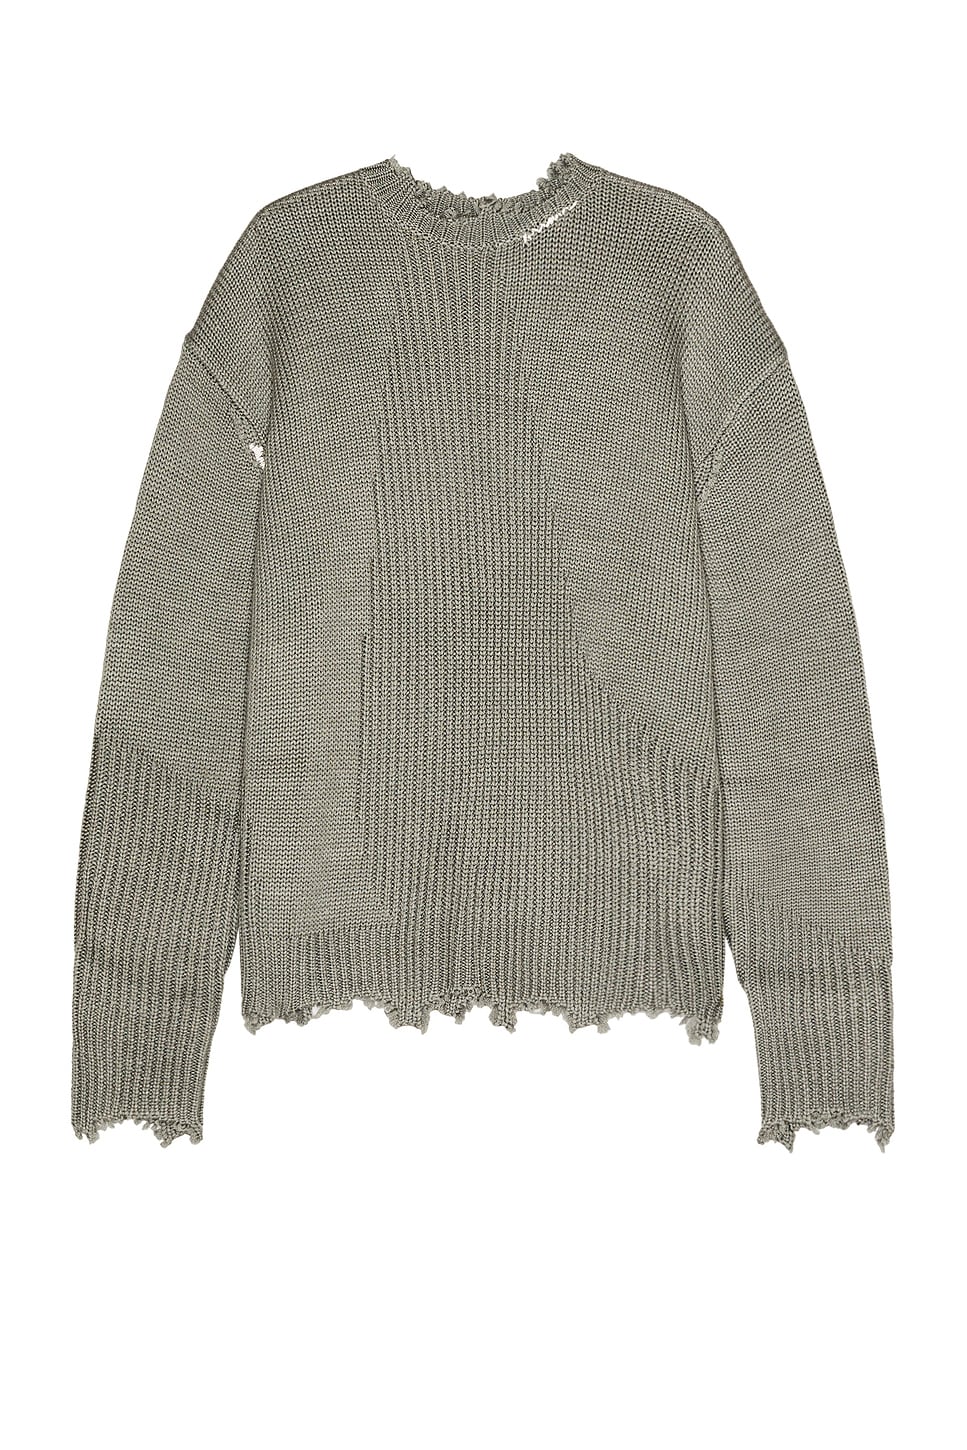 Image 1 of C2H4 Arc Sculpture Knit Sweater in Snowflake Gray